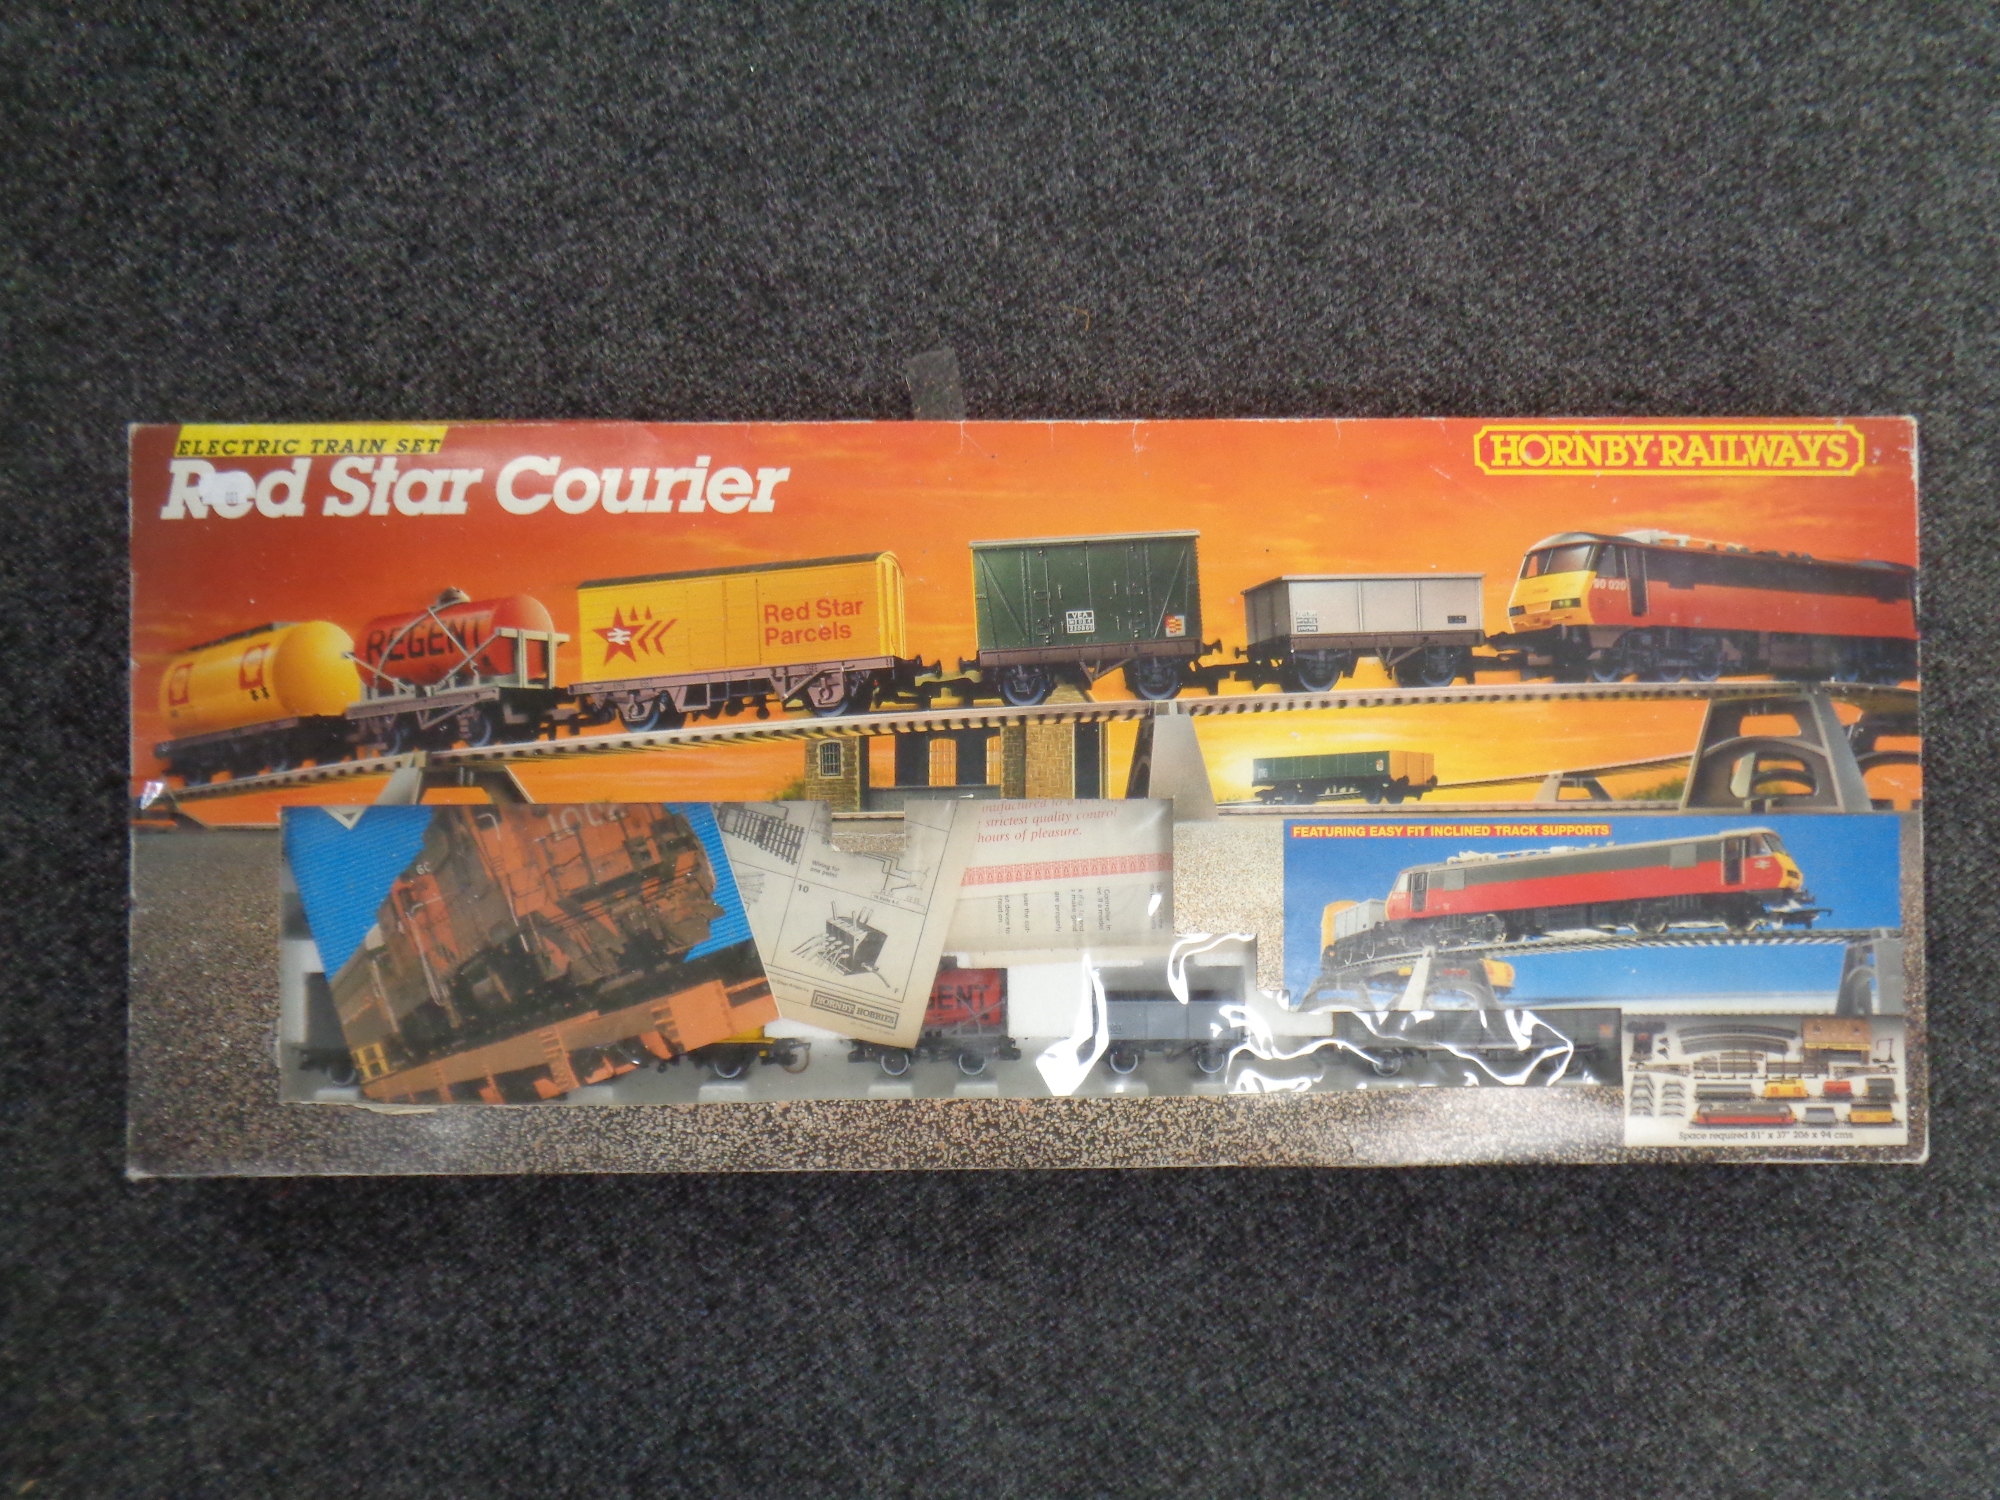 A Hornby Red Star Courier electric train set